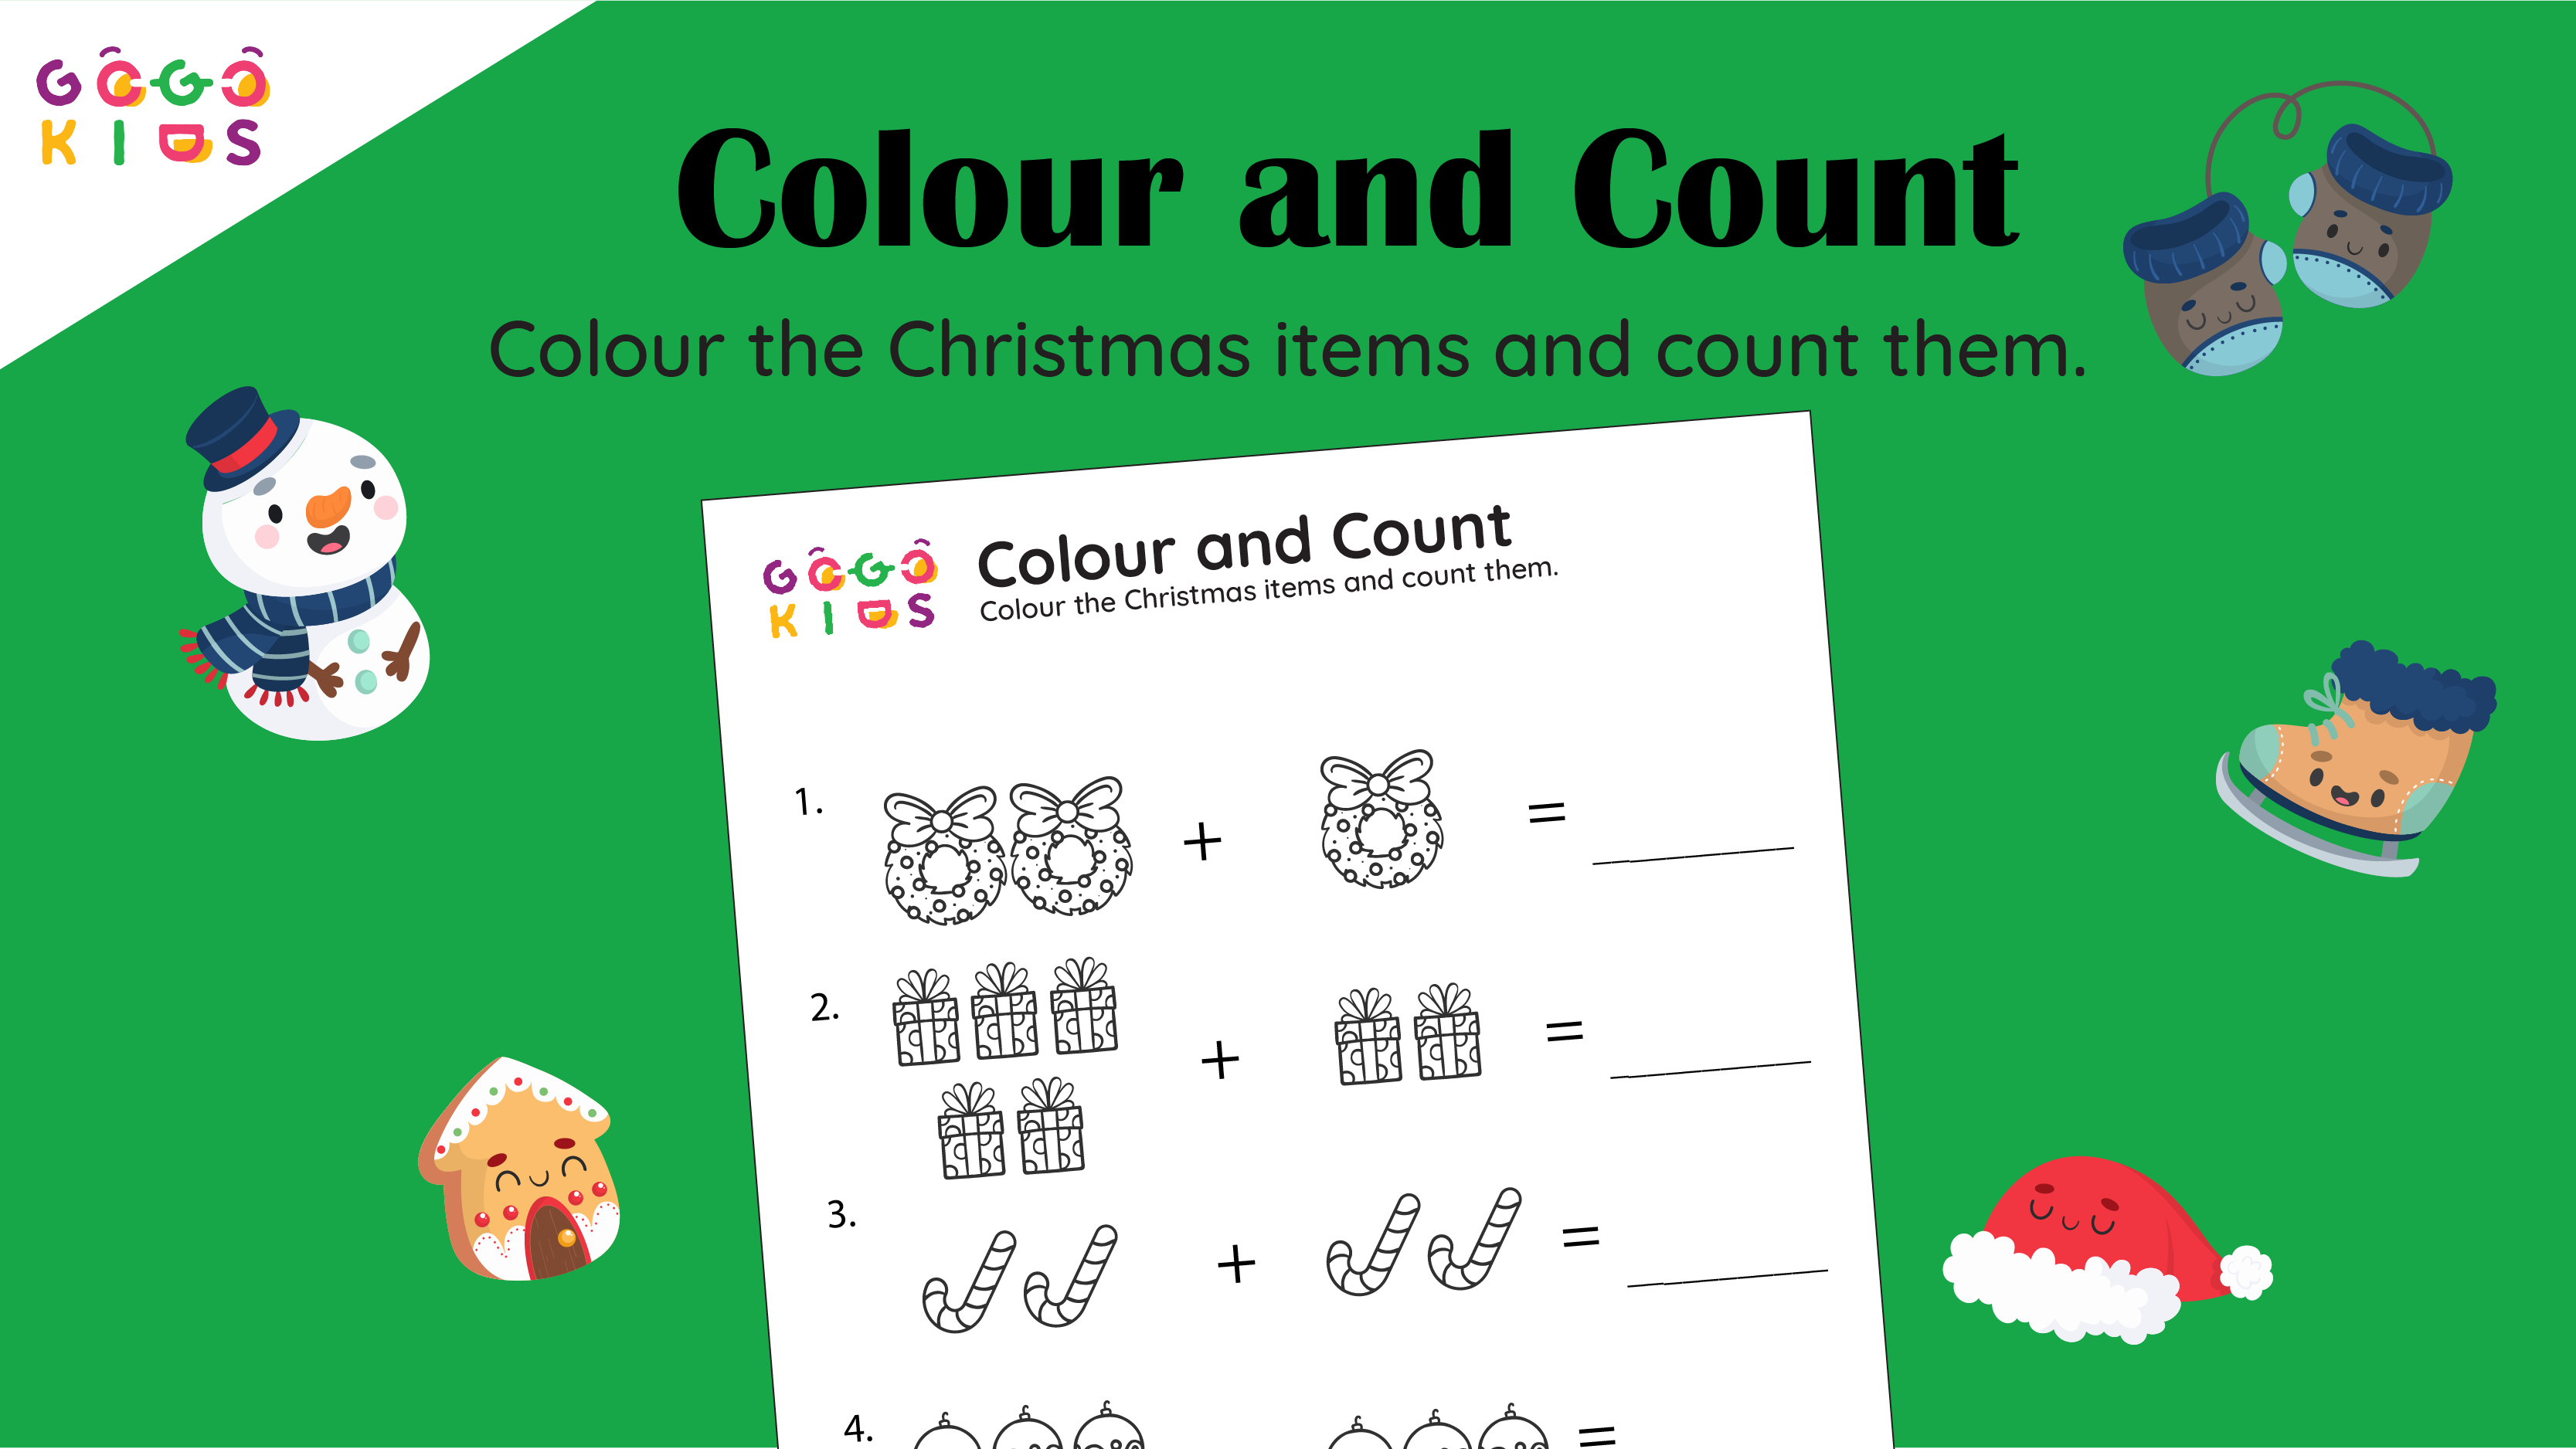 Words and Numbers: Colour and Count